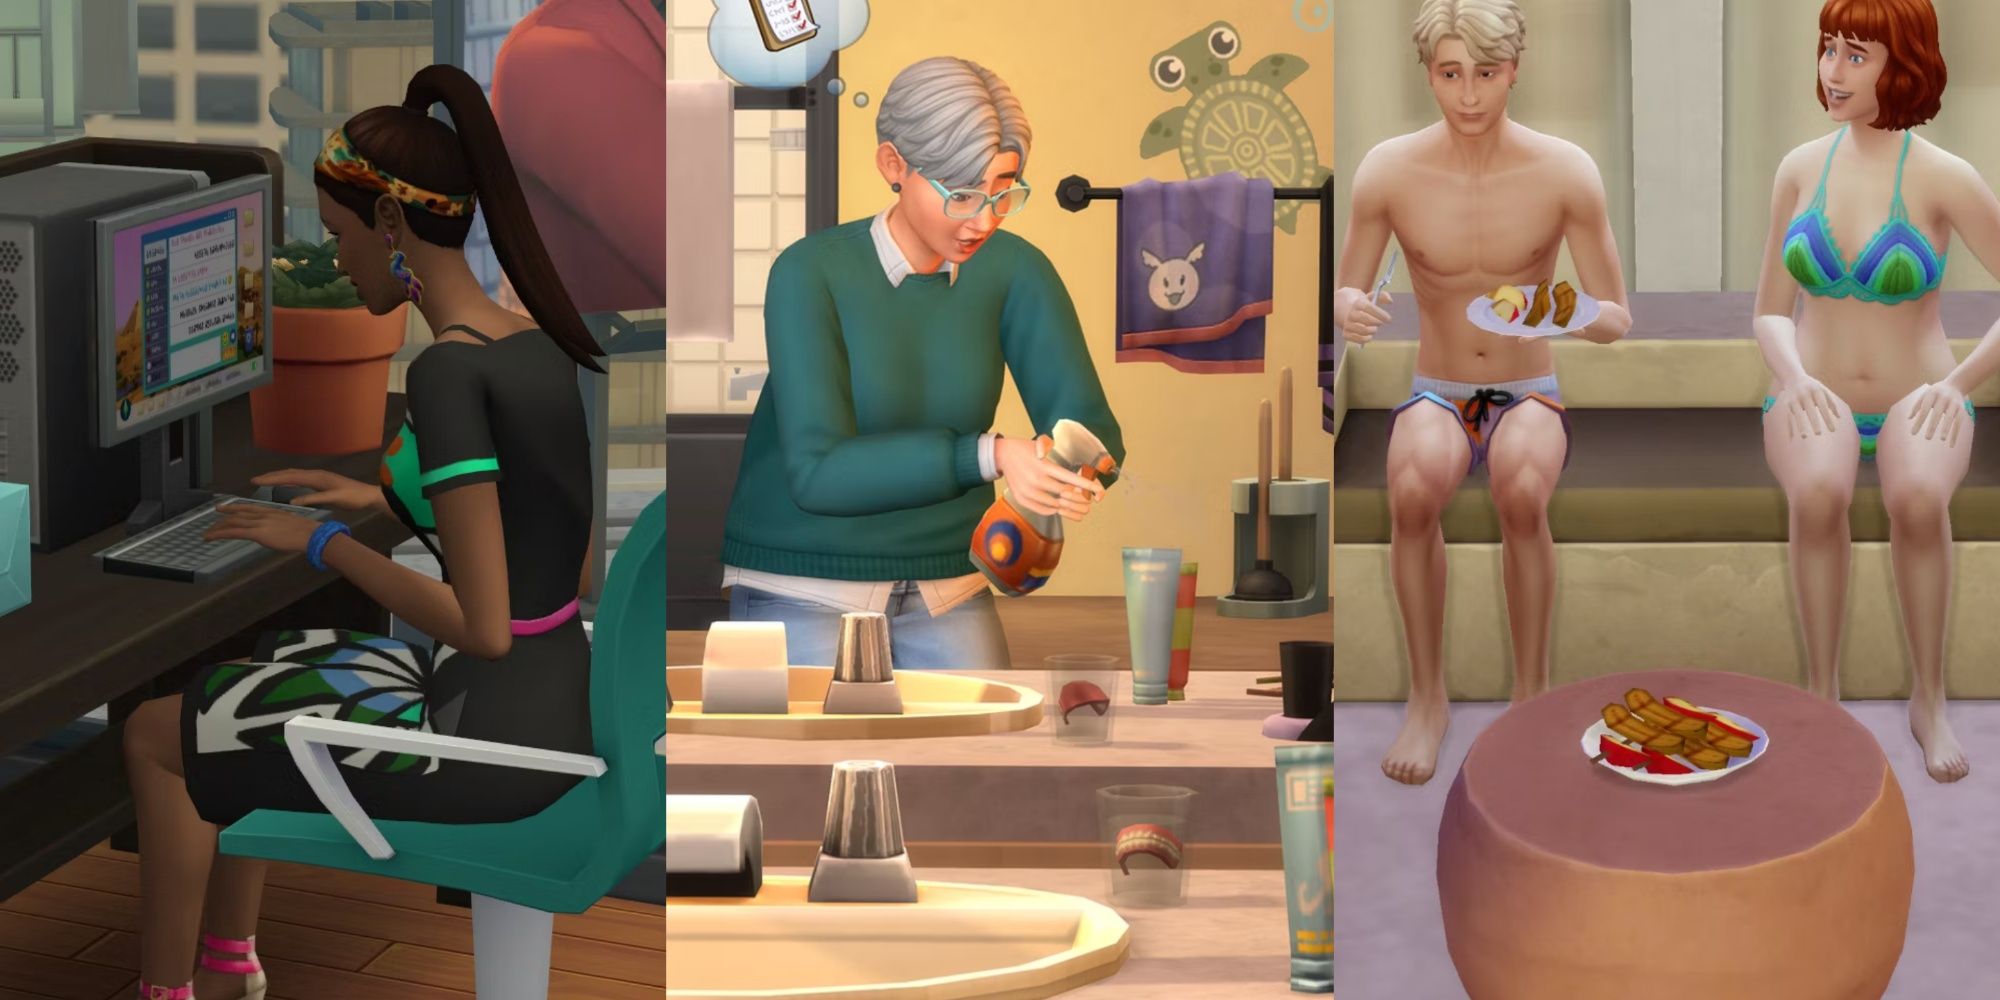 Split images of a Sim at a computer, a Sim cleaning, and Sims eating food in The Sims 4